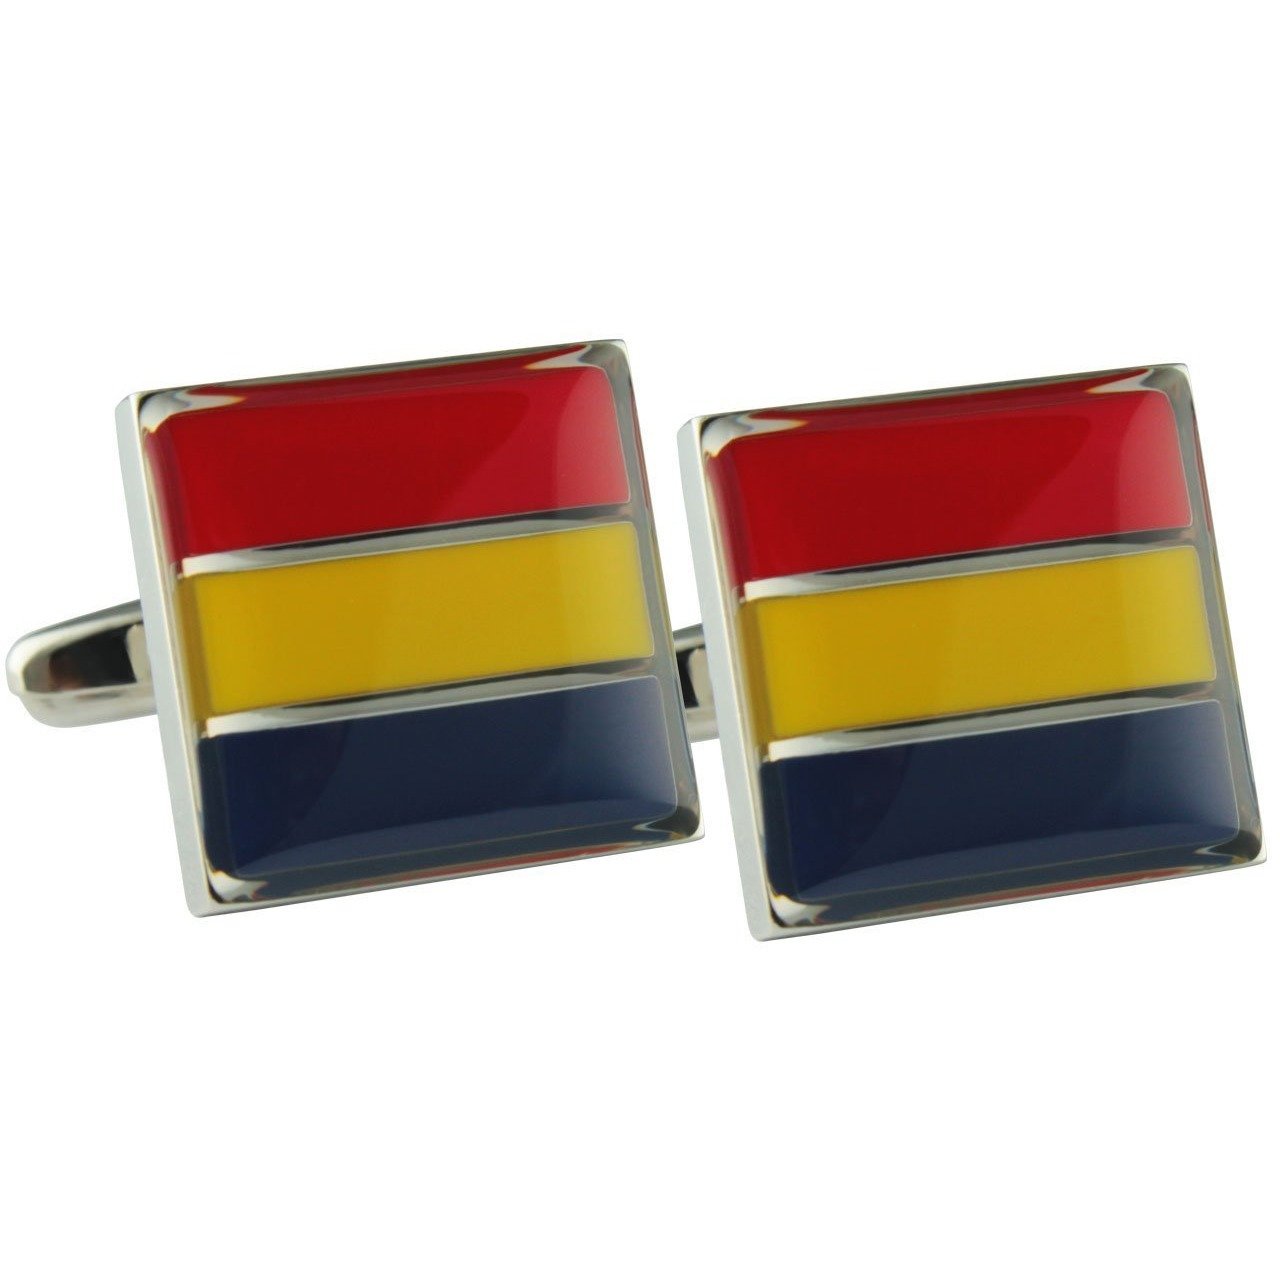 Colour Adelaide Crows AFL Cufflinks